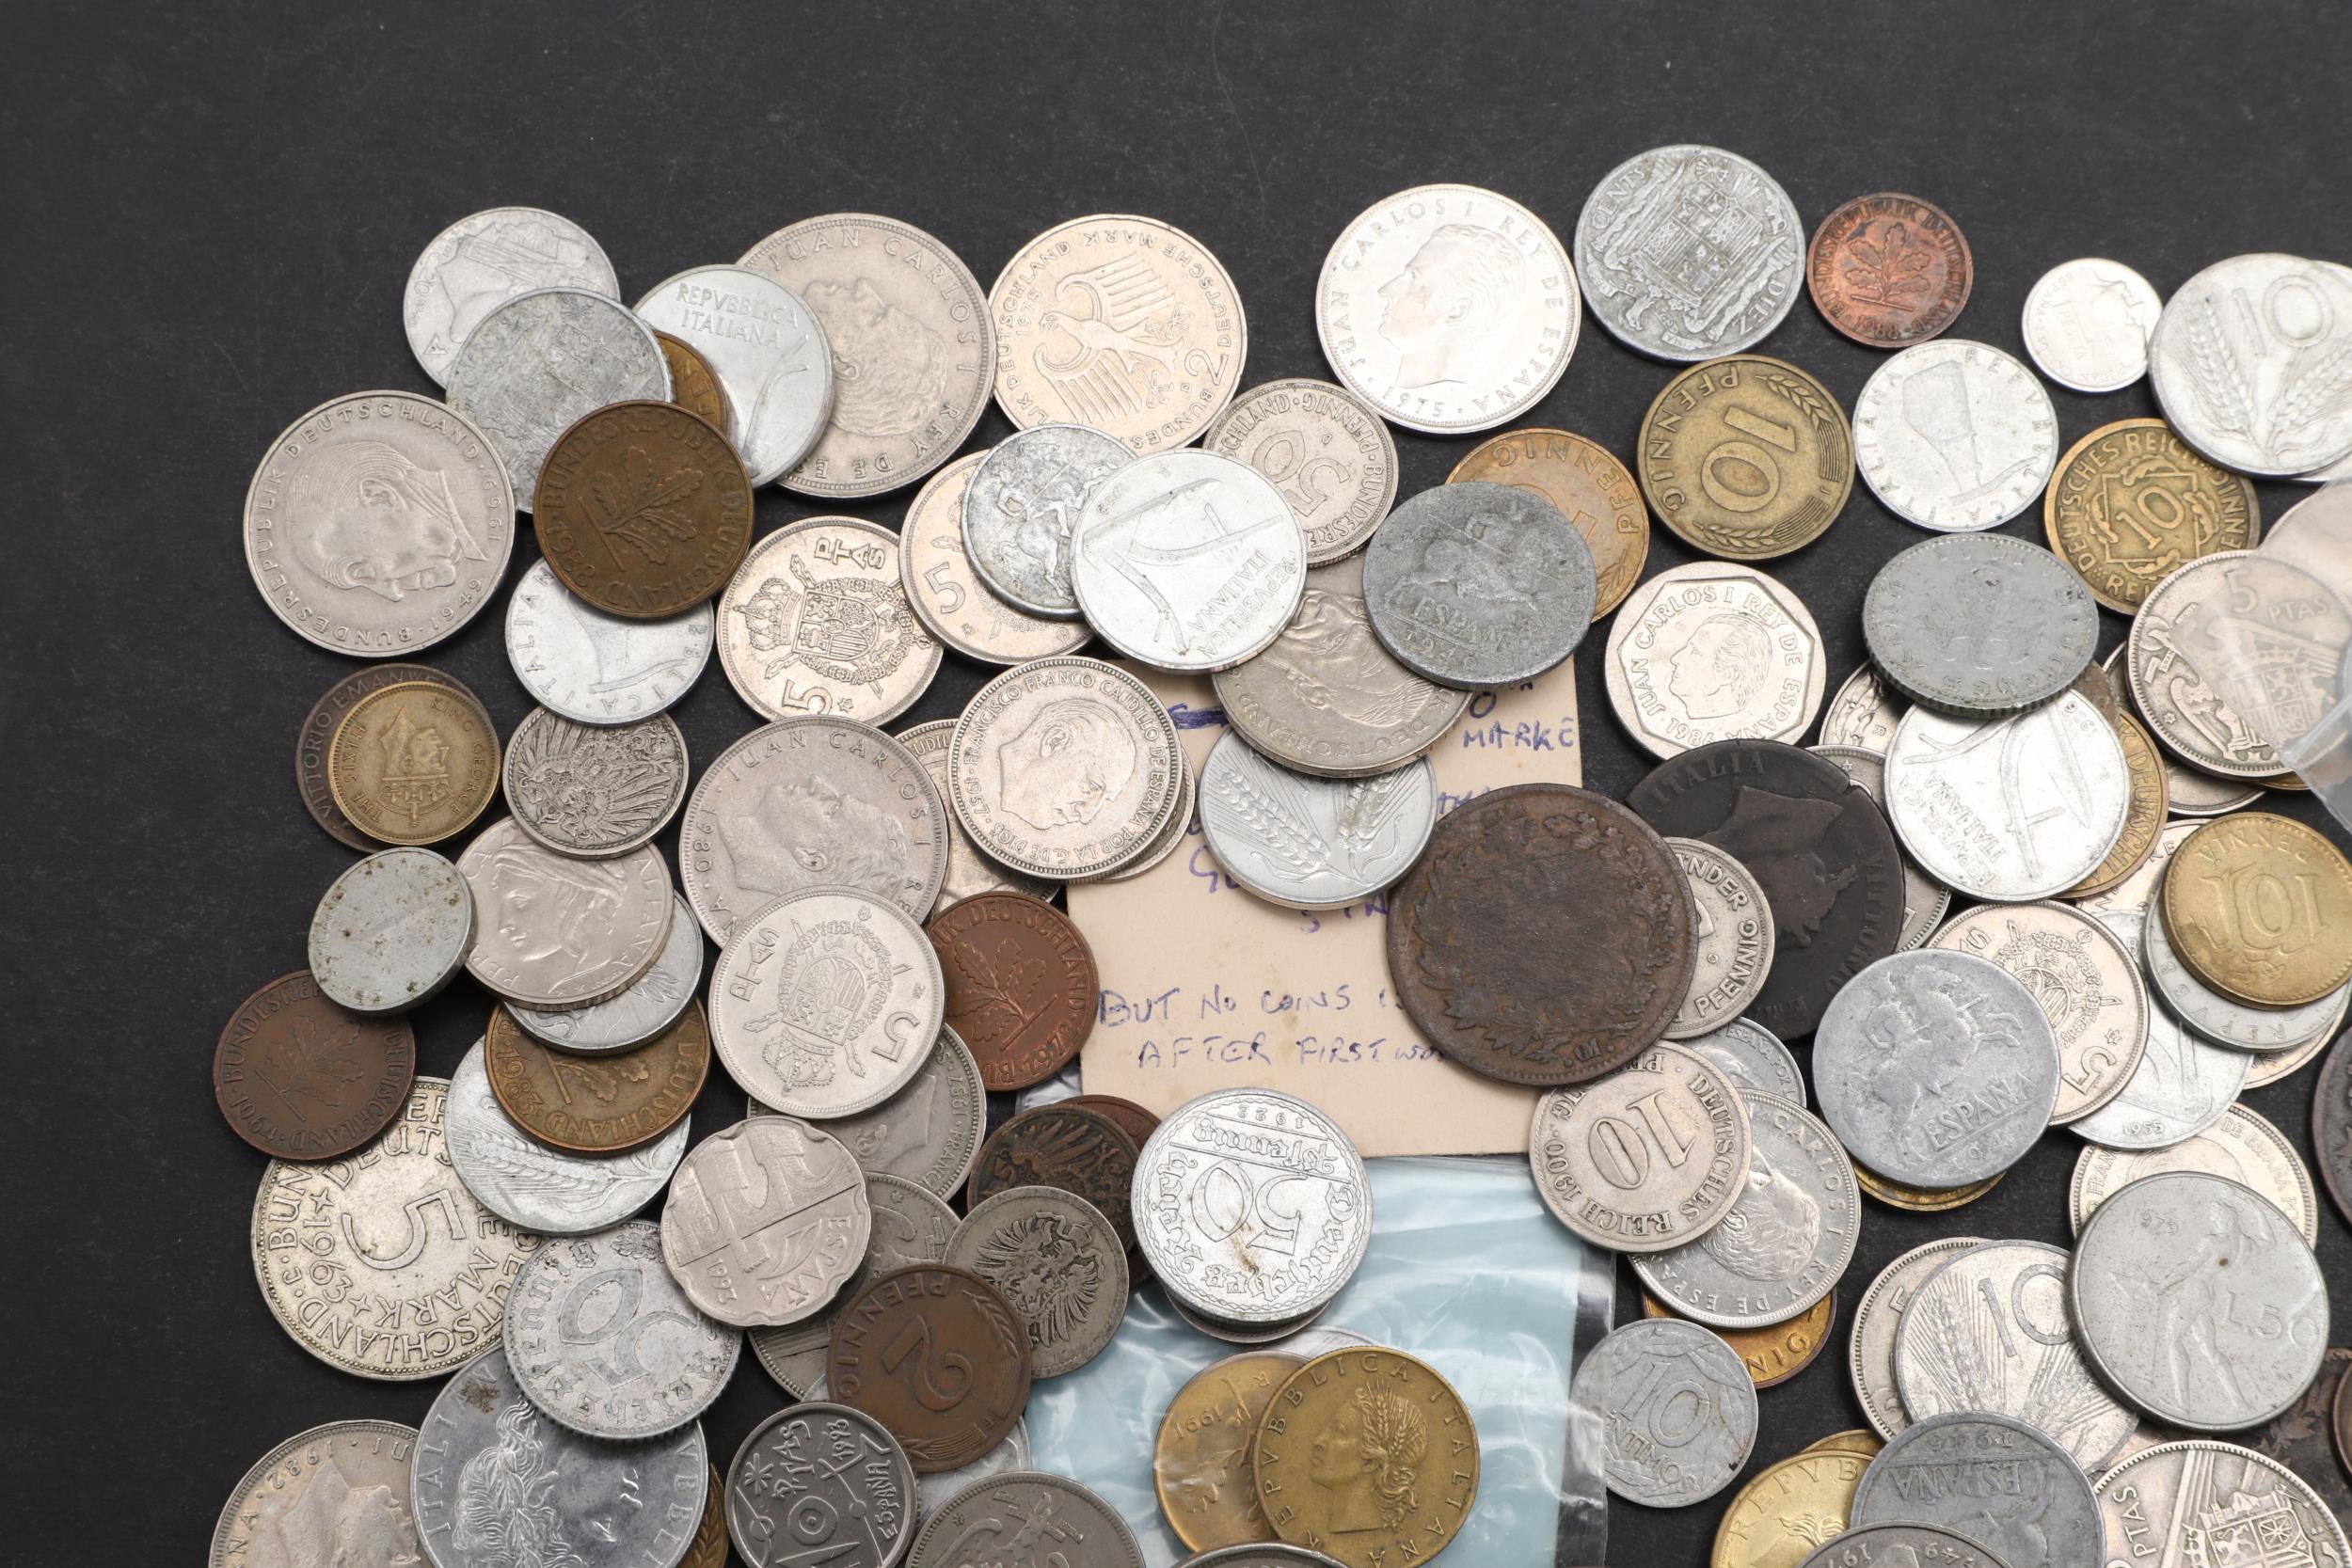 A LARGE COLLECTION OF 19TH AND 20th CENTURY EUROPEAN COINS TO INCLUDE GERMANY, SPAIN AND ITALY. - Image 2 of 10